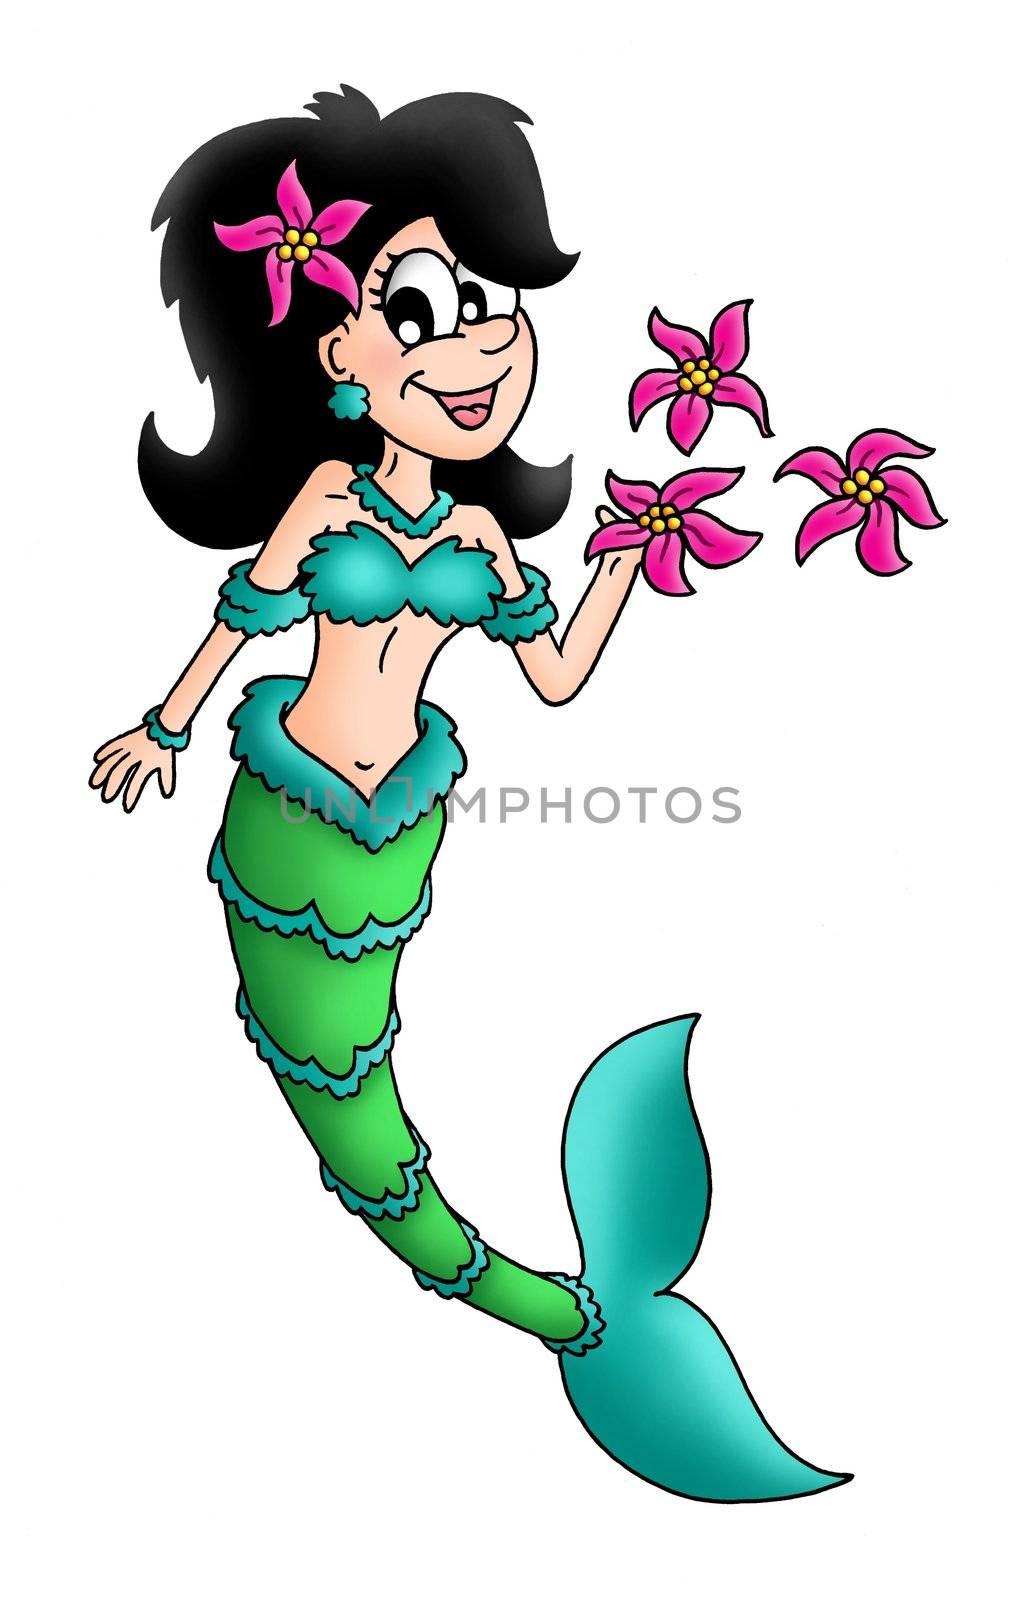 Mermaid with flowers by clairev